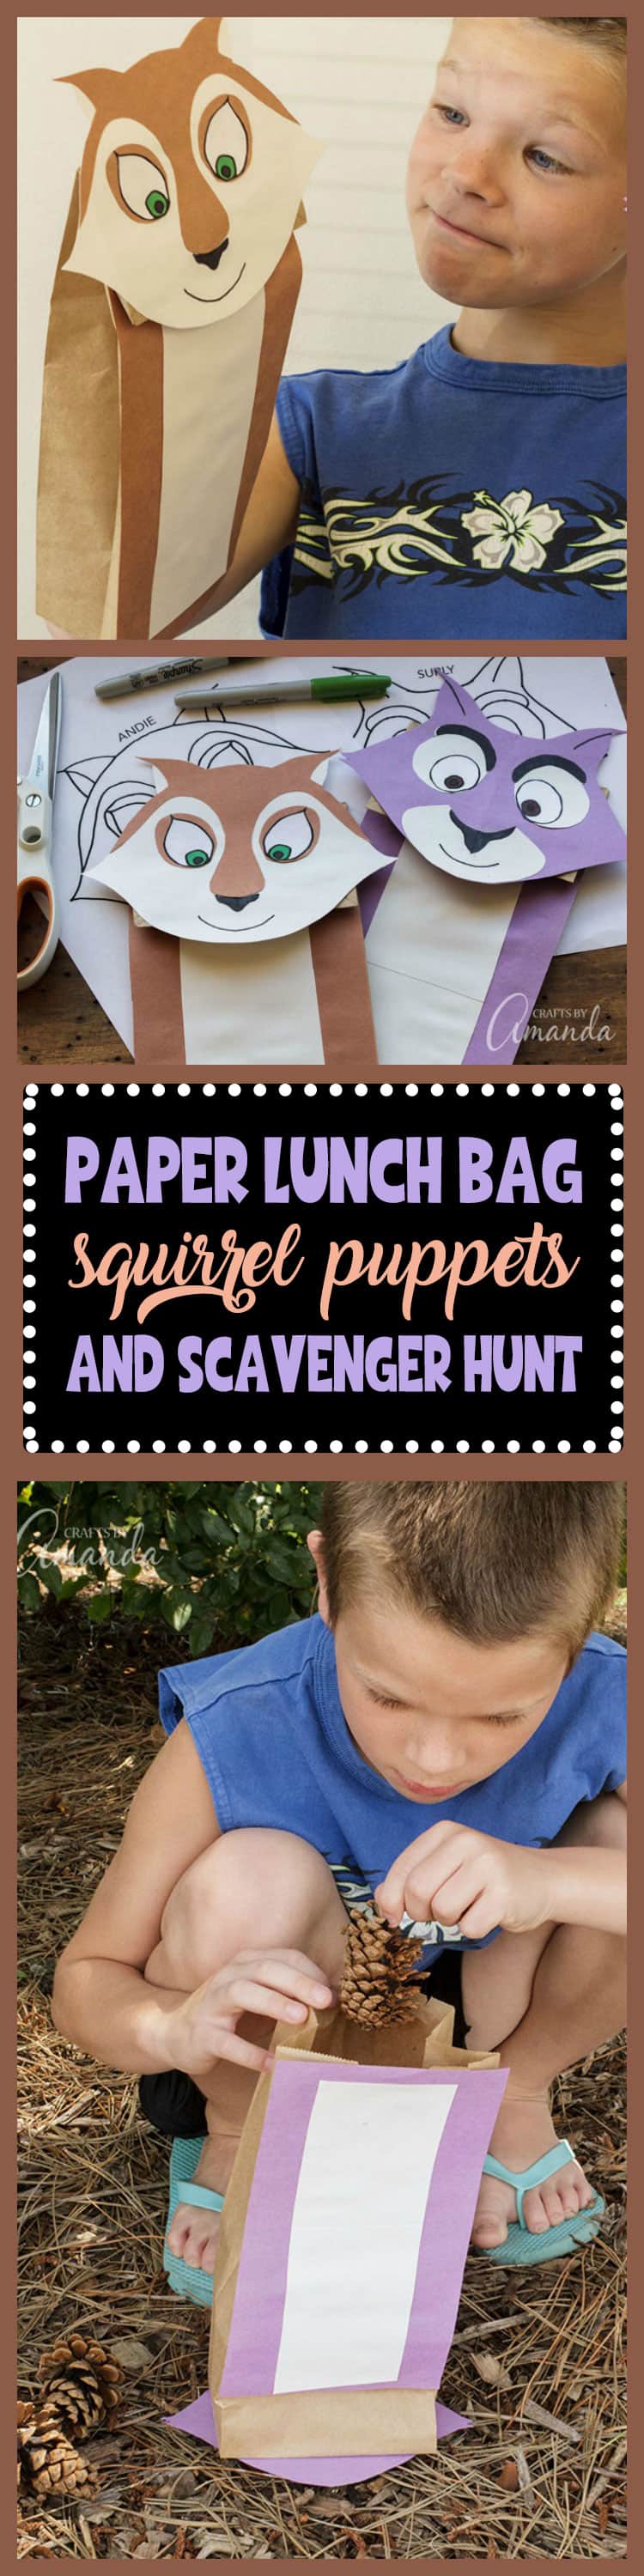 Make paper bag squirrel puppets to play out the scenes of the movie #TheNutJob2 - then head outside for a scavenger hunt! #sponsored